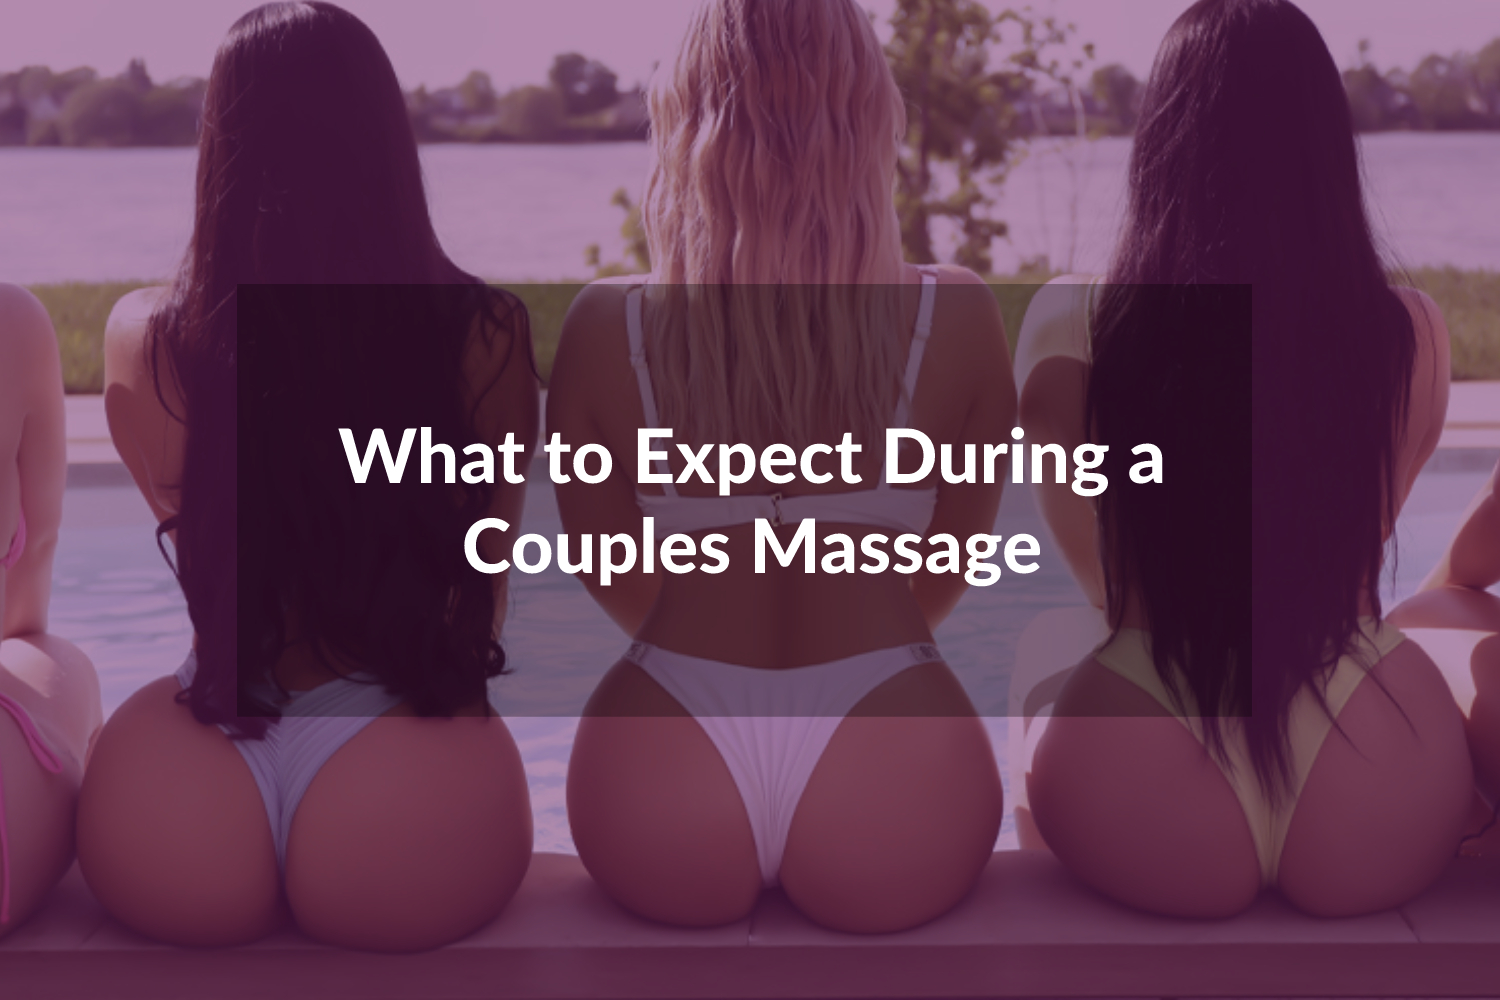 What to Expect During an Erotic Couples Massage